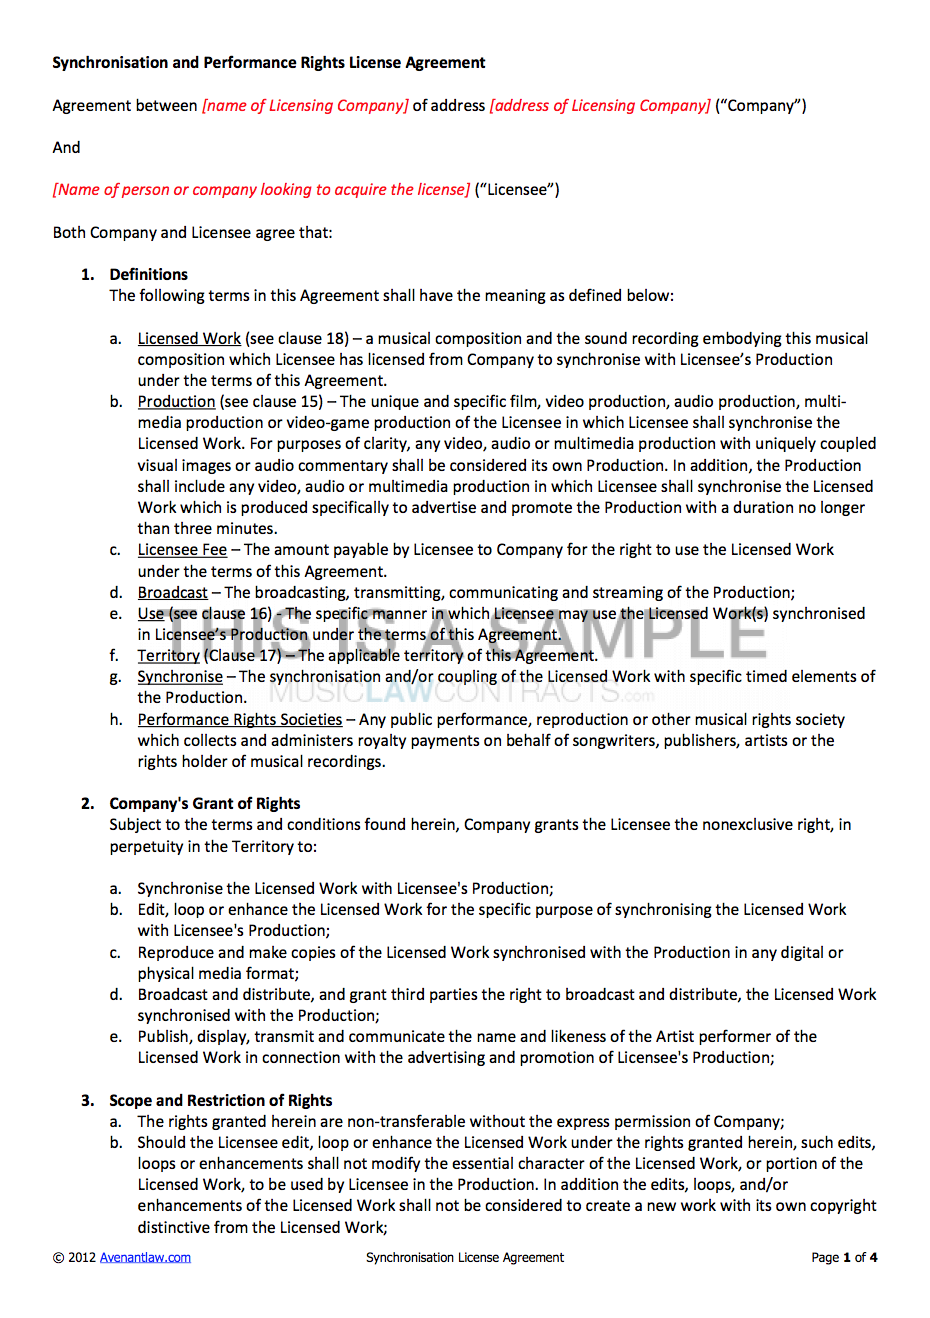 Synchronisation License Contract Template